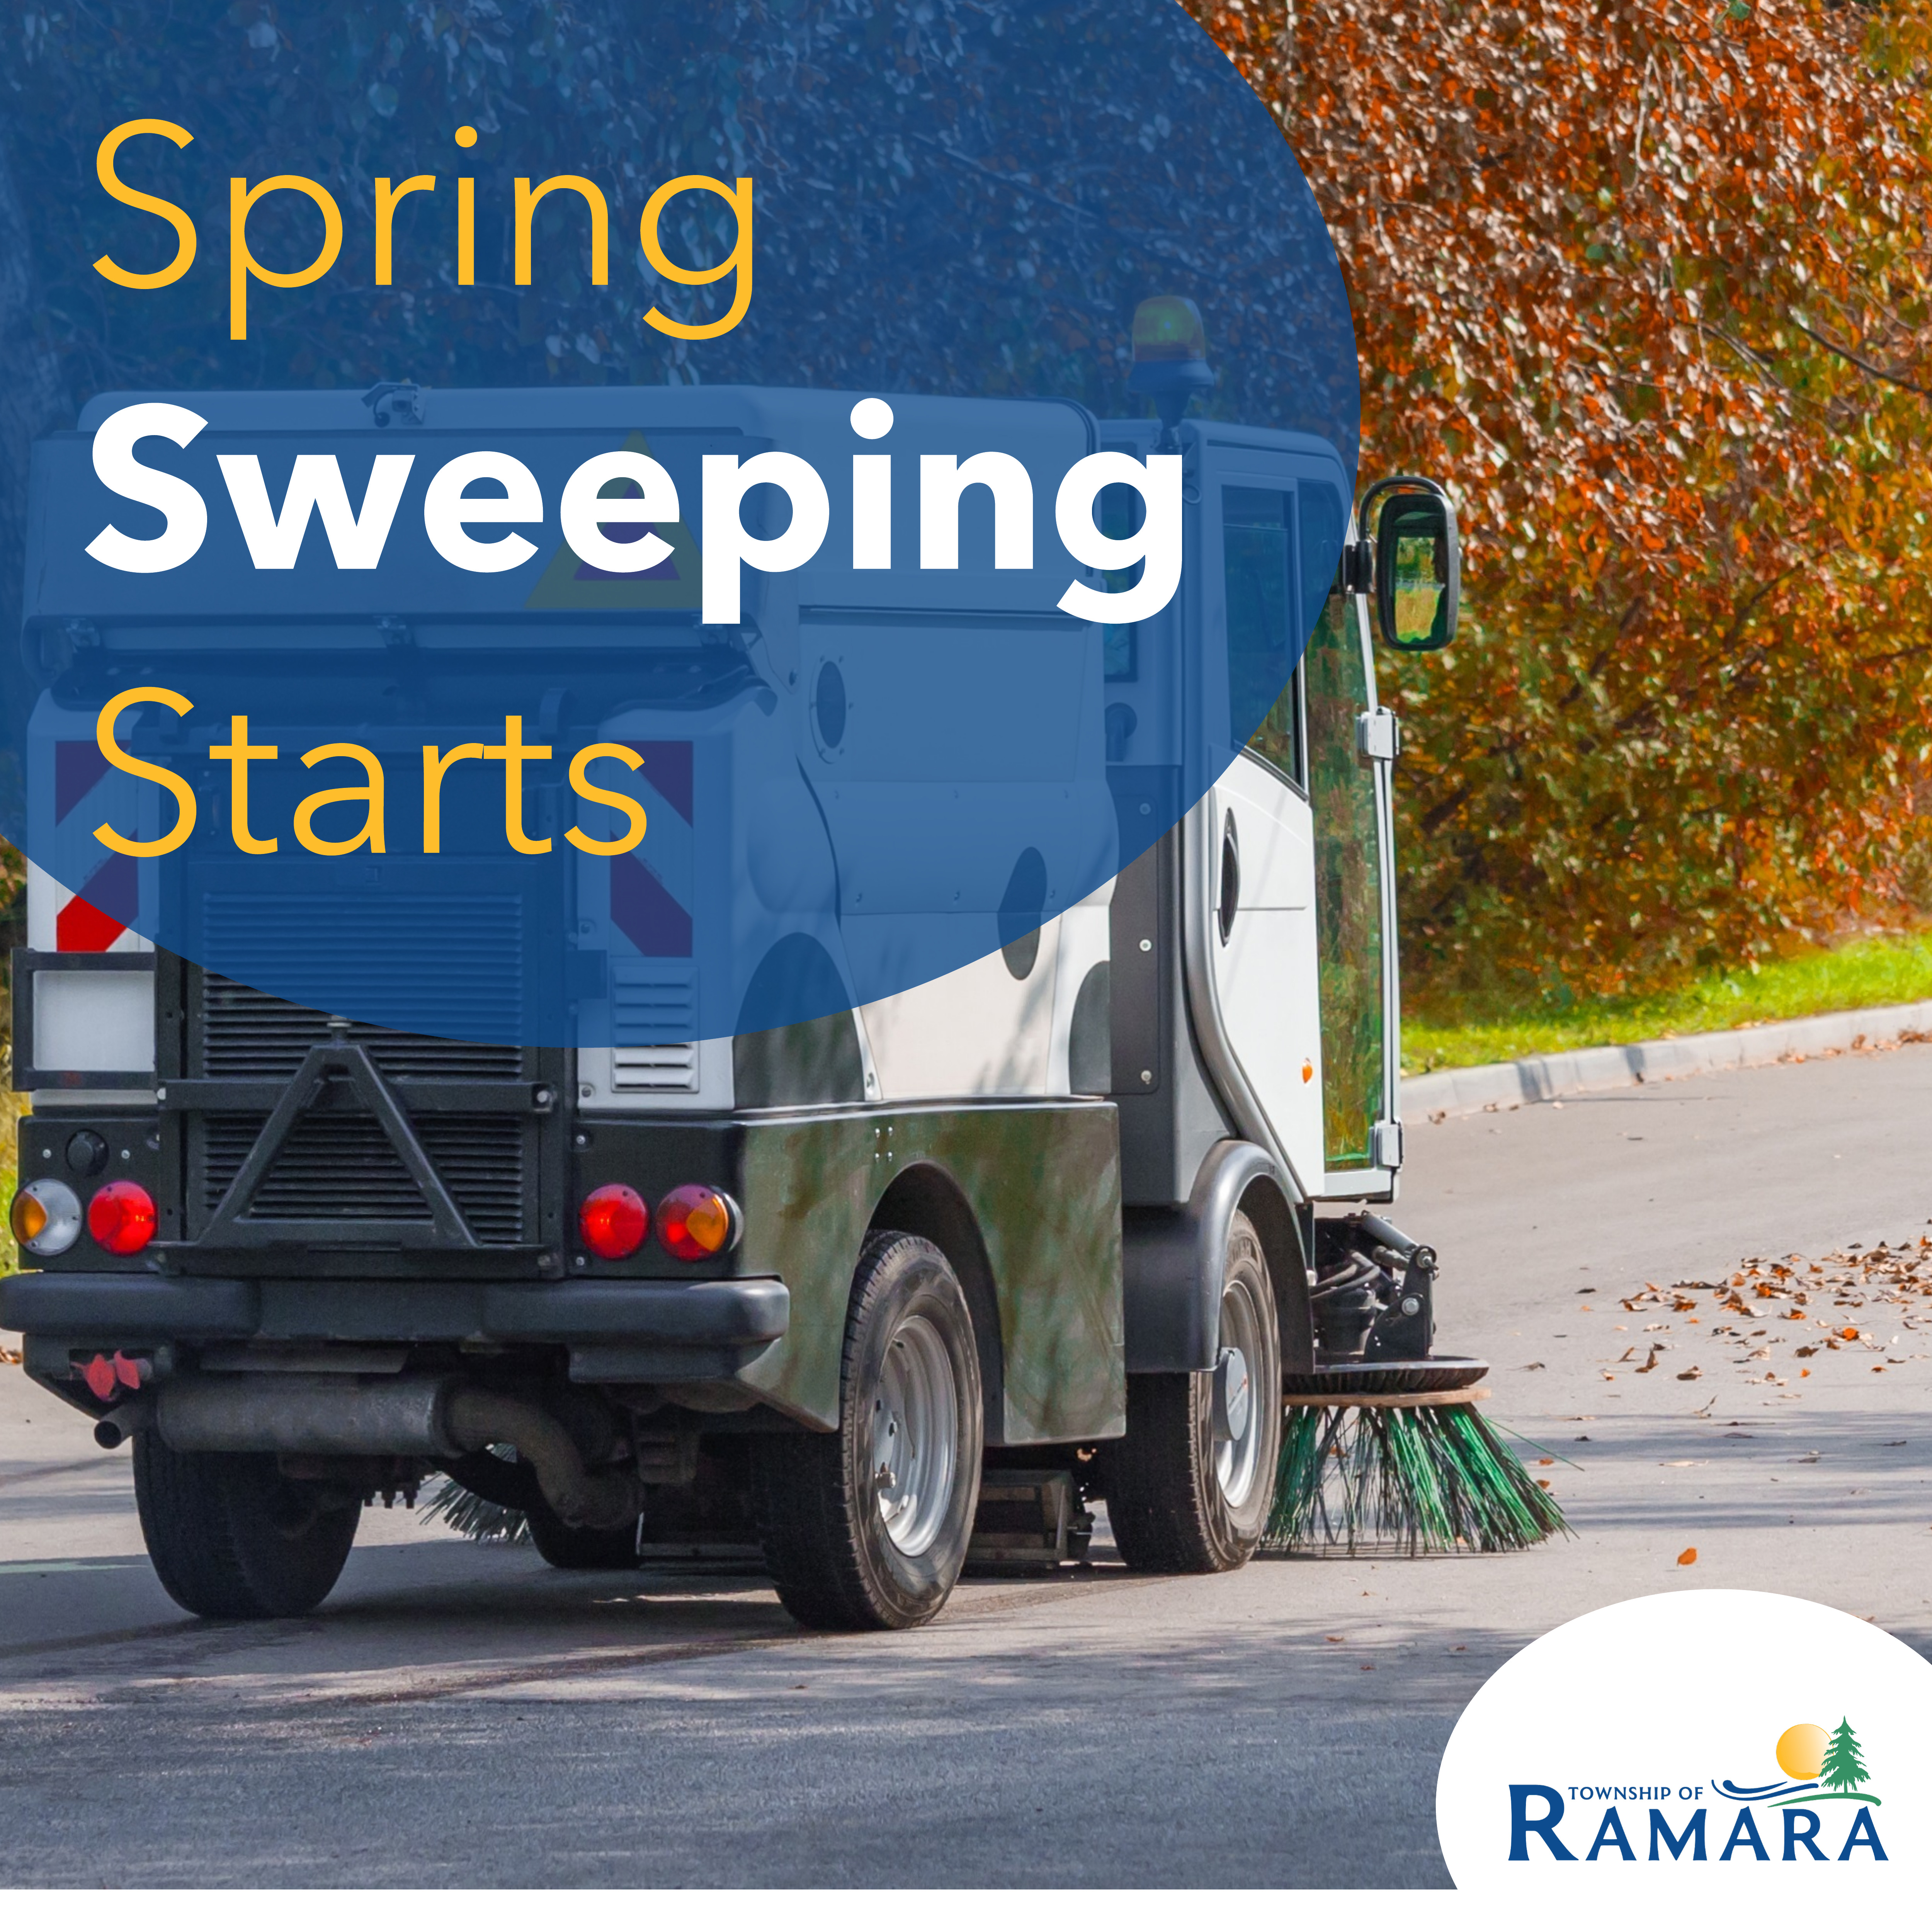 Picture of a street sweeper with the words 'Spring Sweeping Starts'